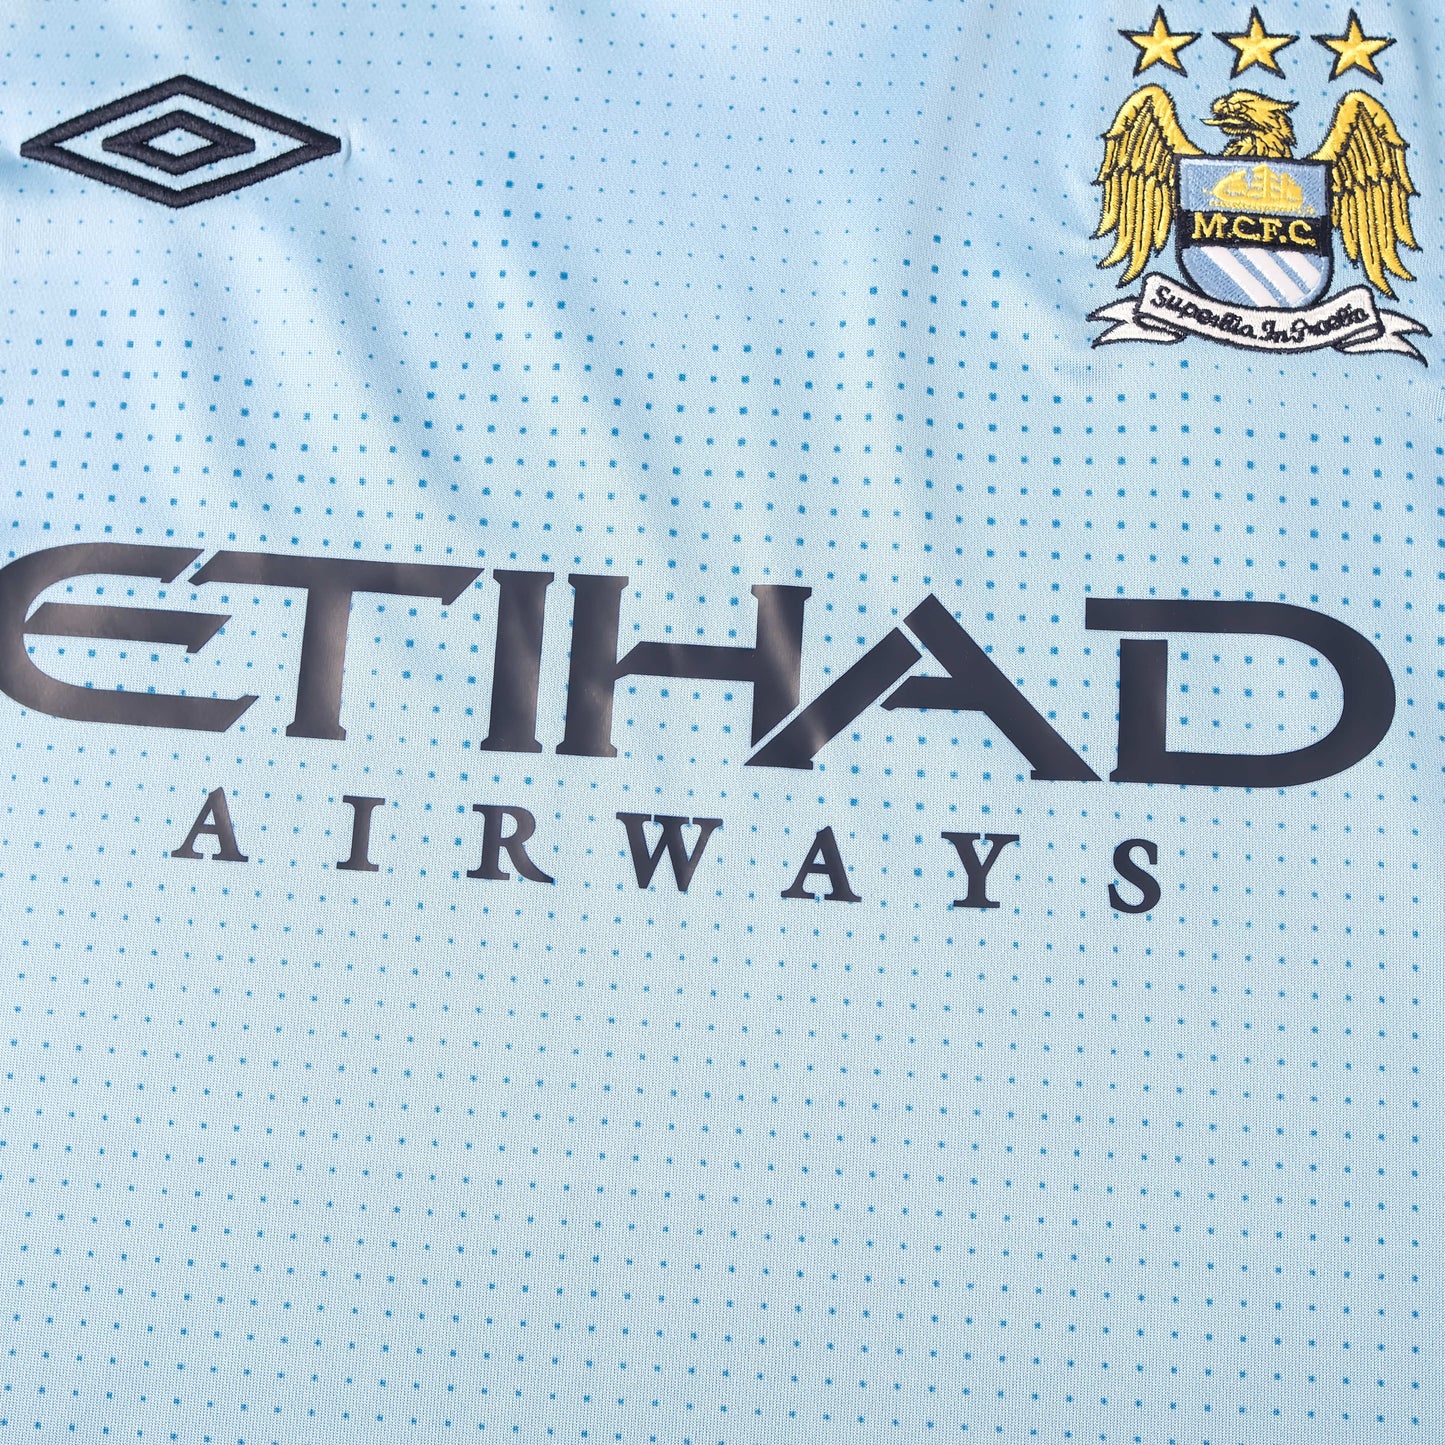 Manchester City 11/12 Home Jersey